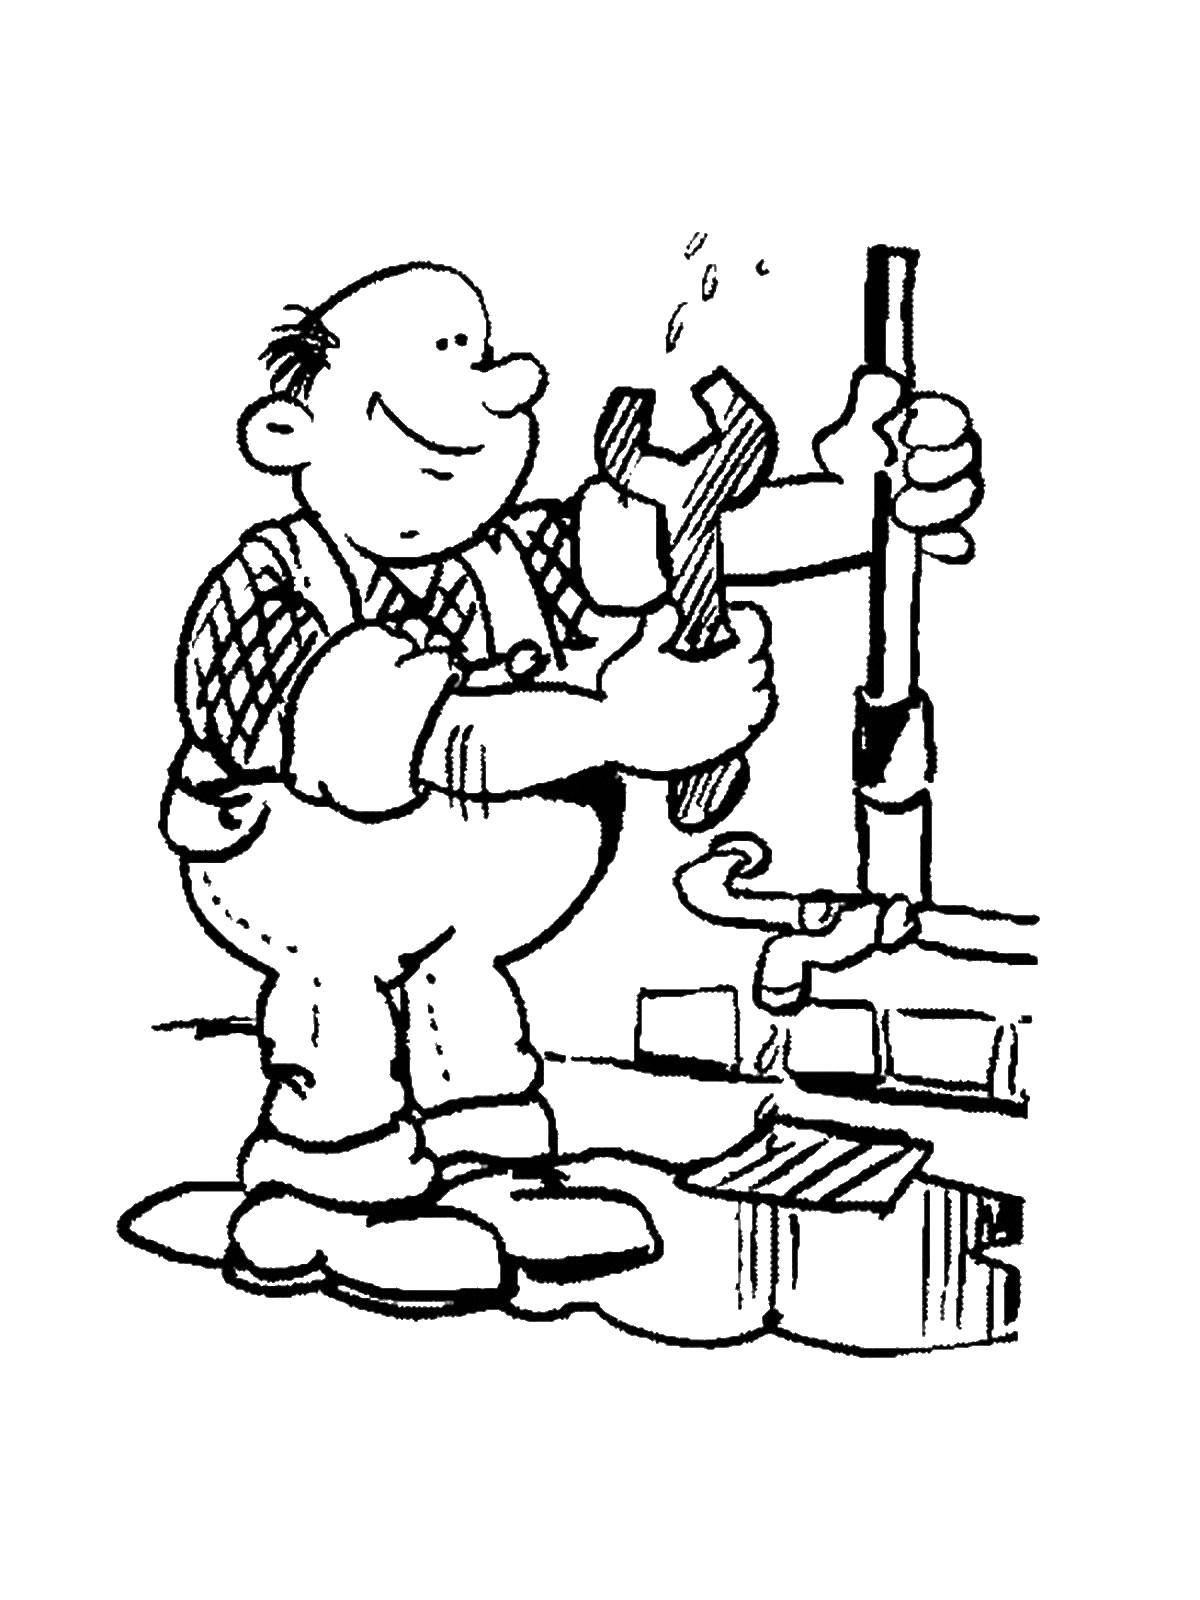 Coloring Plumber. Category a profession. Tags:  profession, plumber.